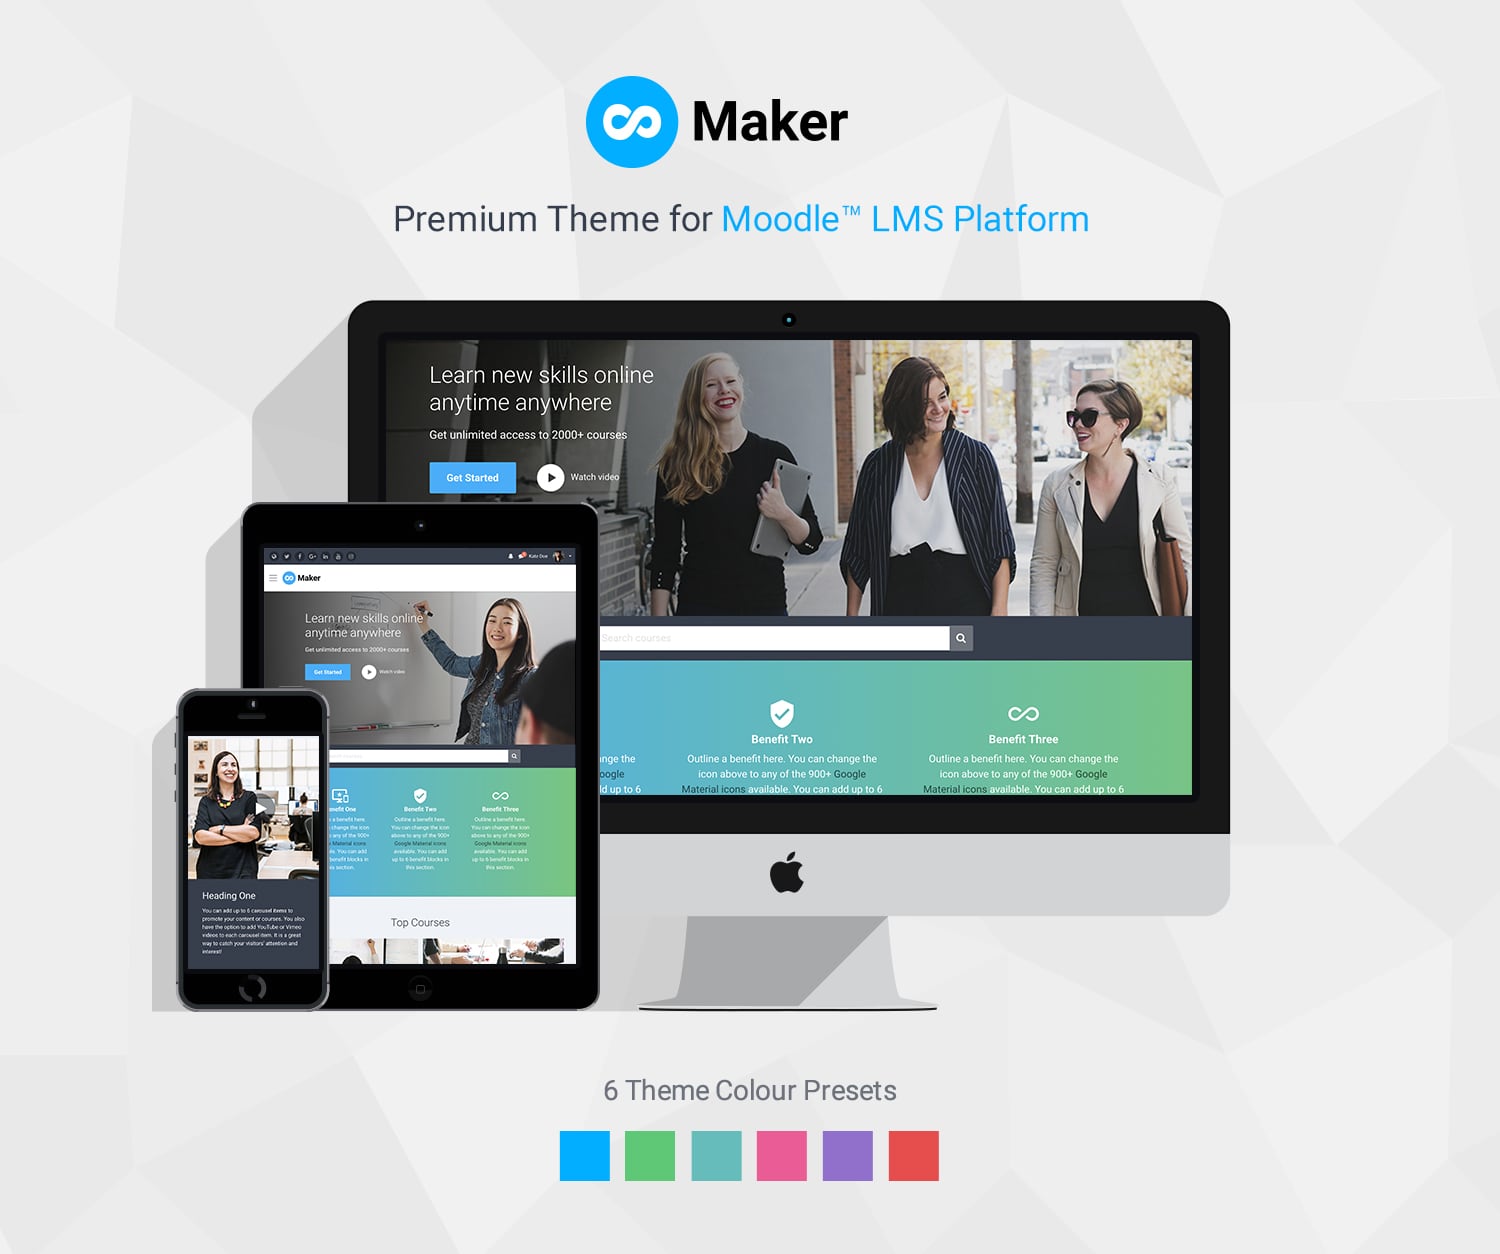 Premium-Moodle-Theme-Maker-For-Higher-Education-Businesses-Government